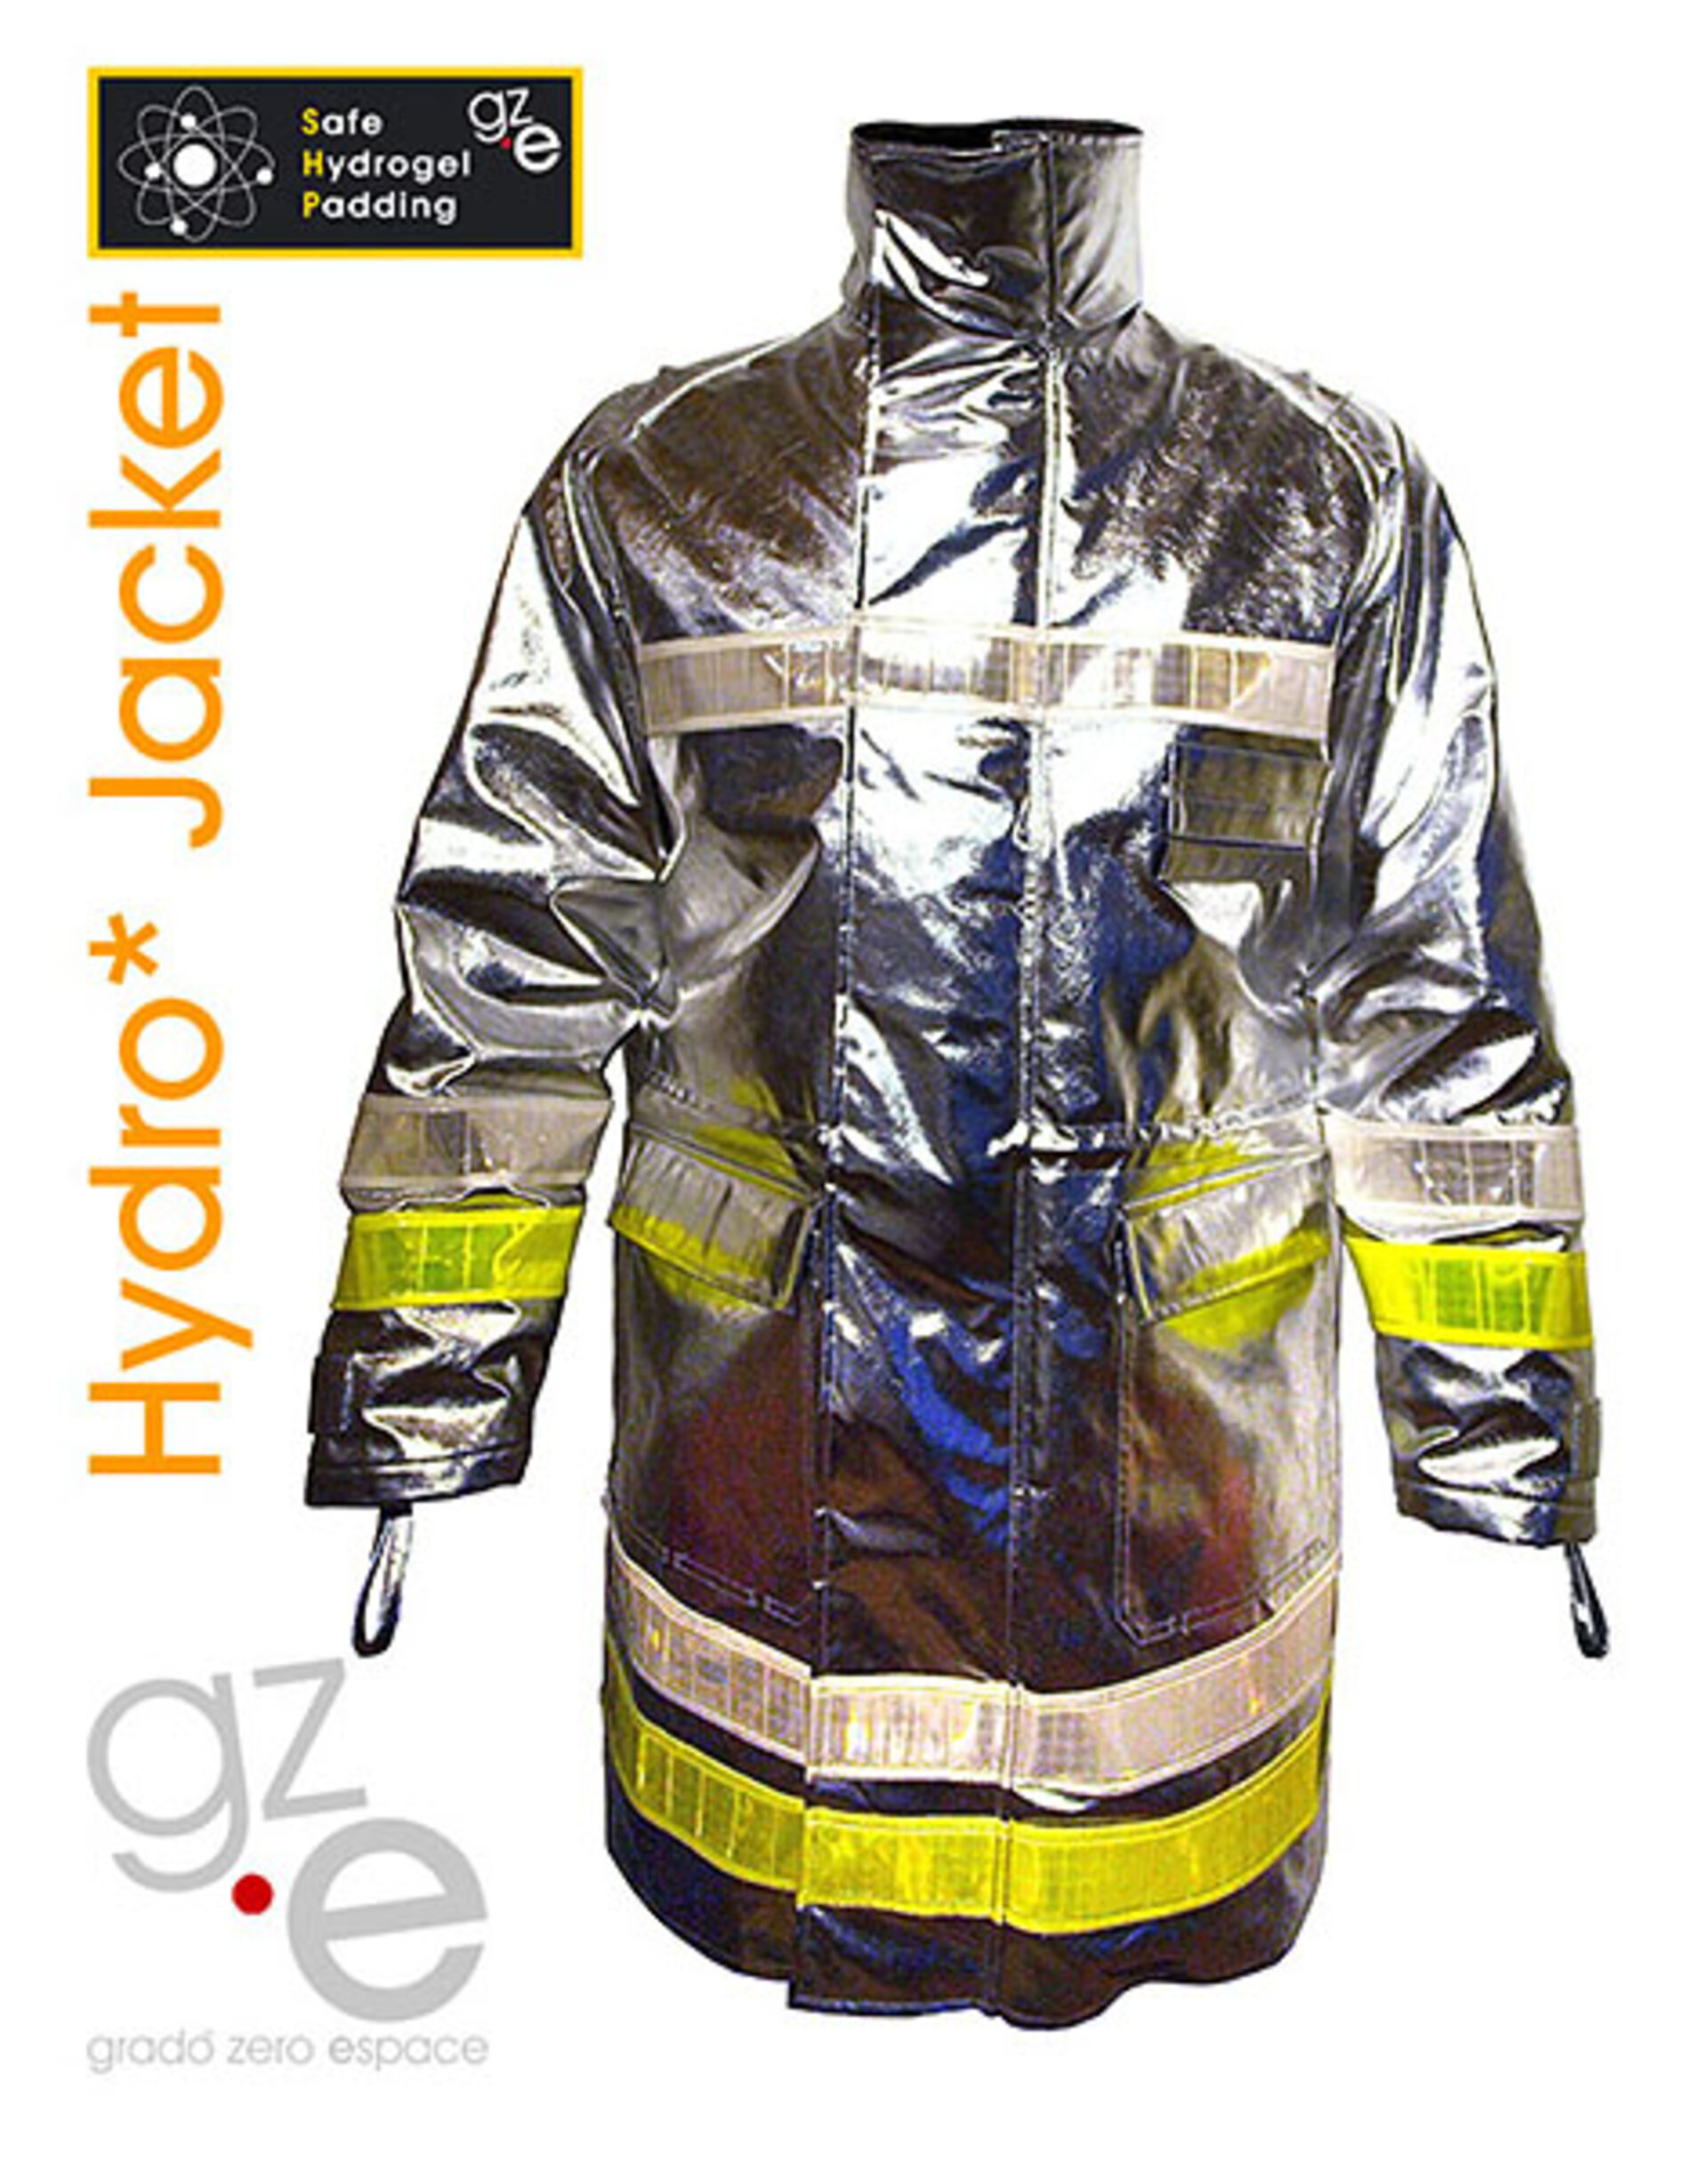 Hydro*jacket for firefighters